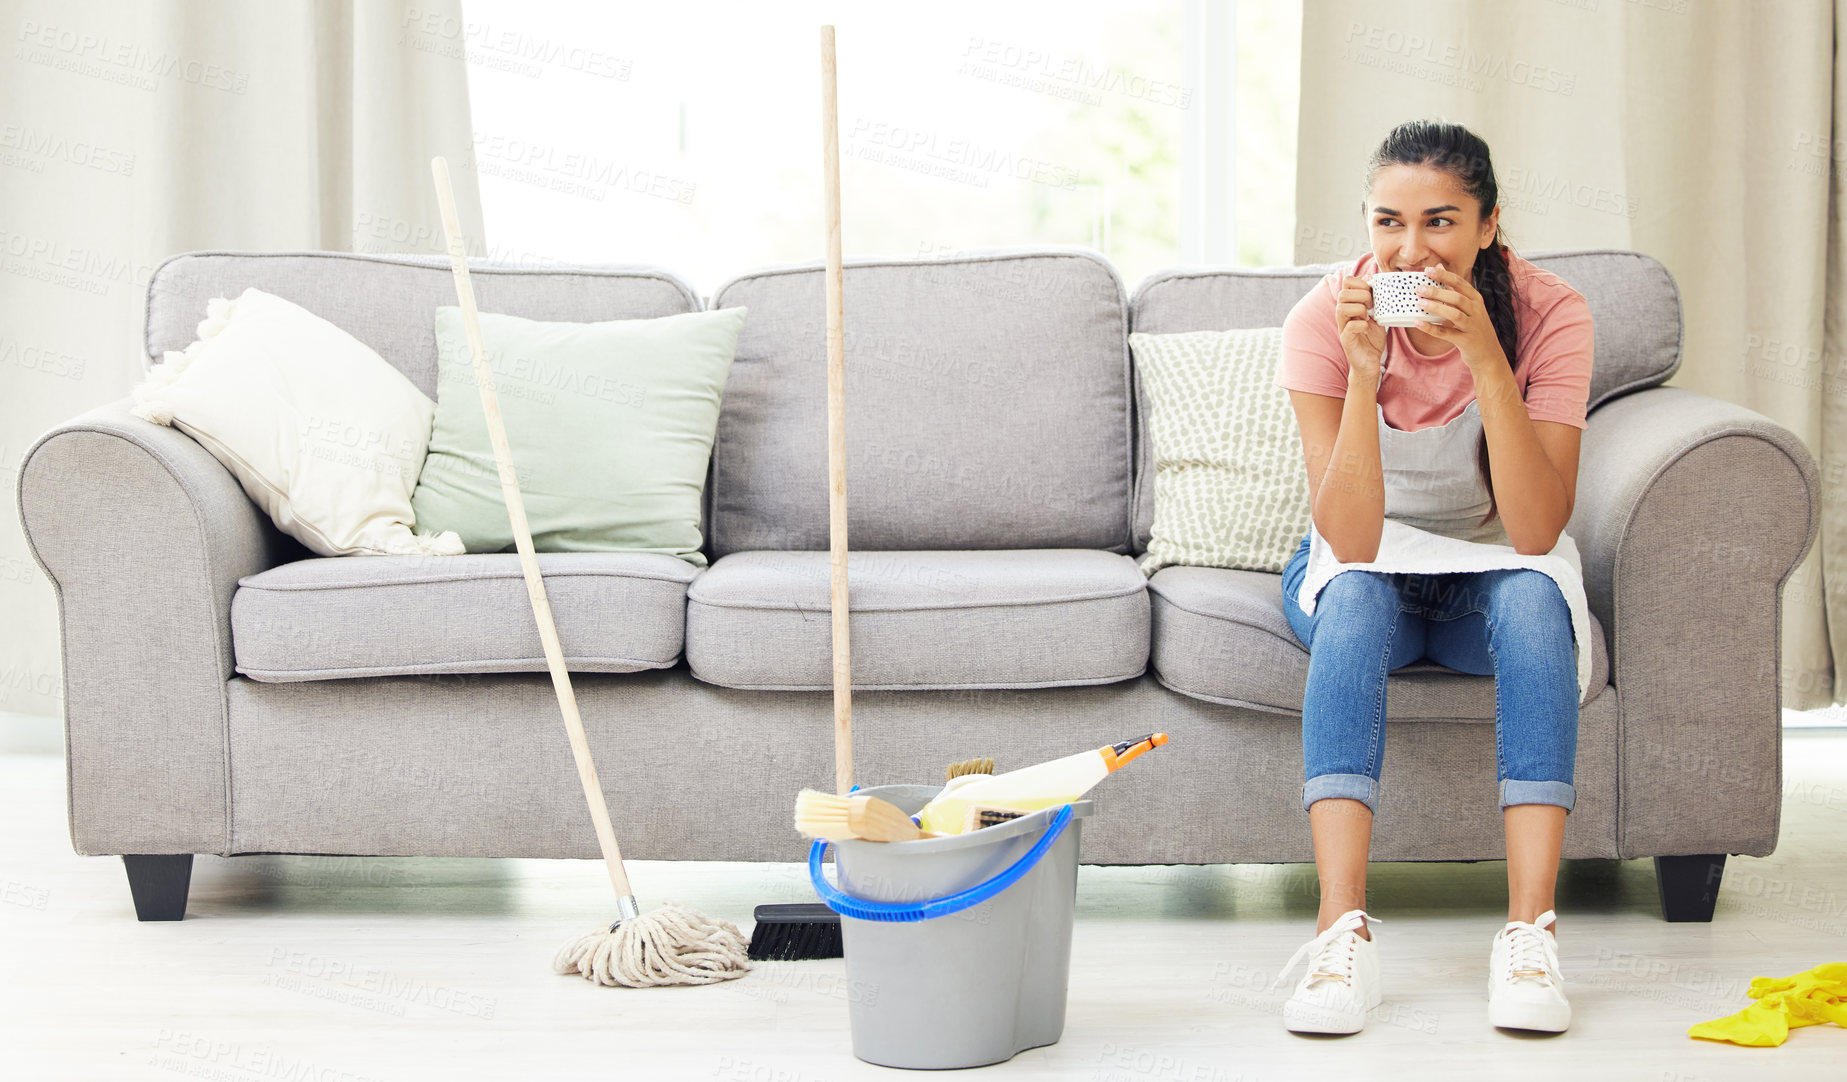 Buy stock photo Shot of a woman taking a coffee break while cleaning at home